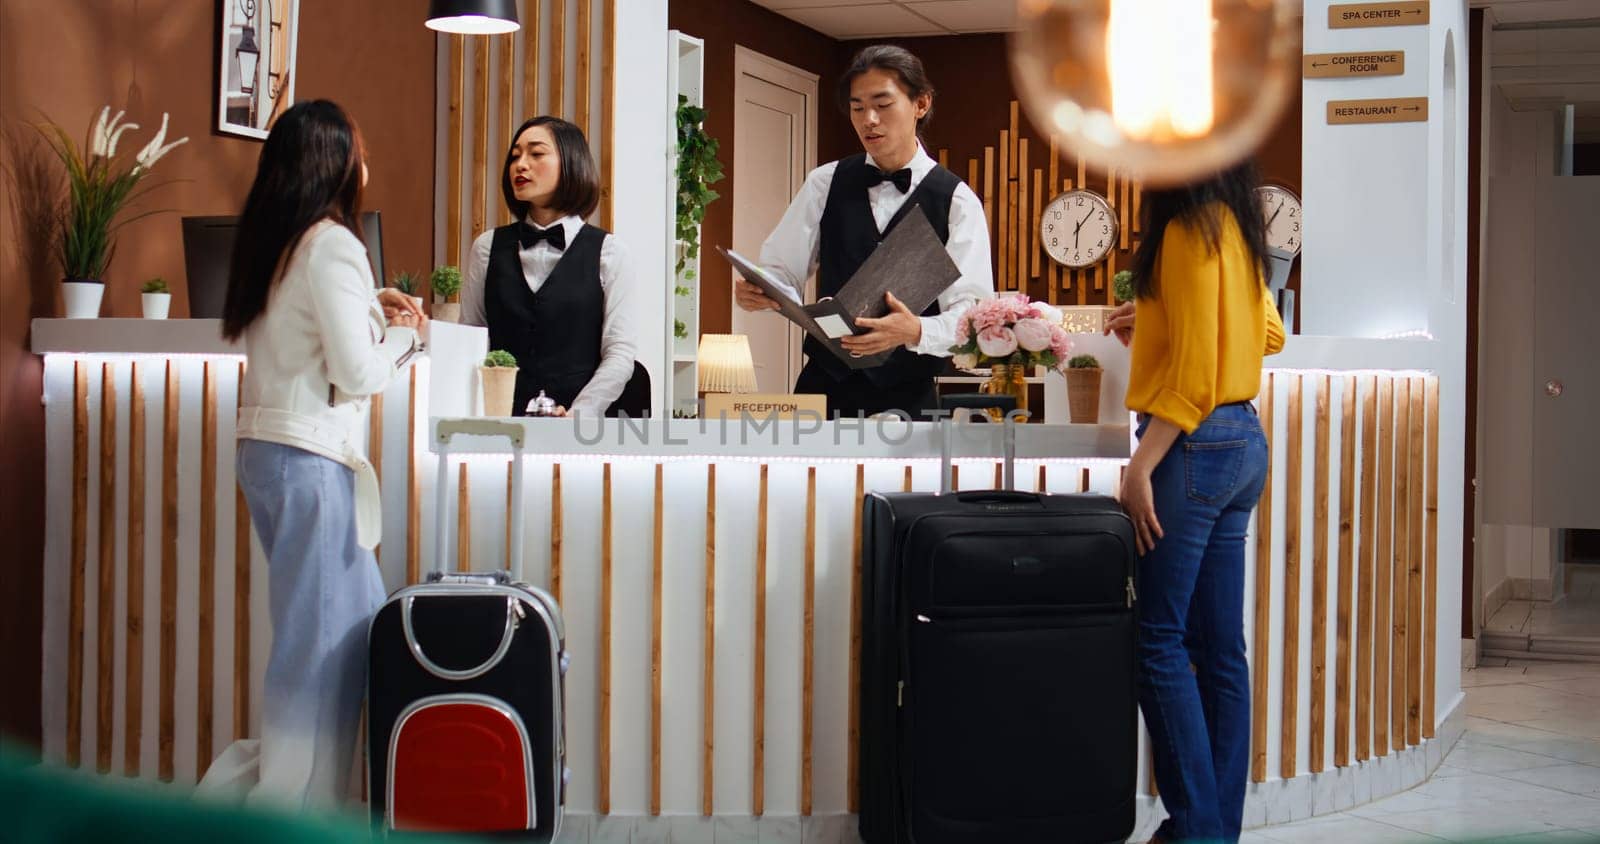 Hotel employees greeting customers at front desk in lobby, preparing for check in process. Receptionist looking for room reservation details, travelers confirming booking accommodation.